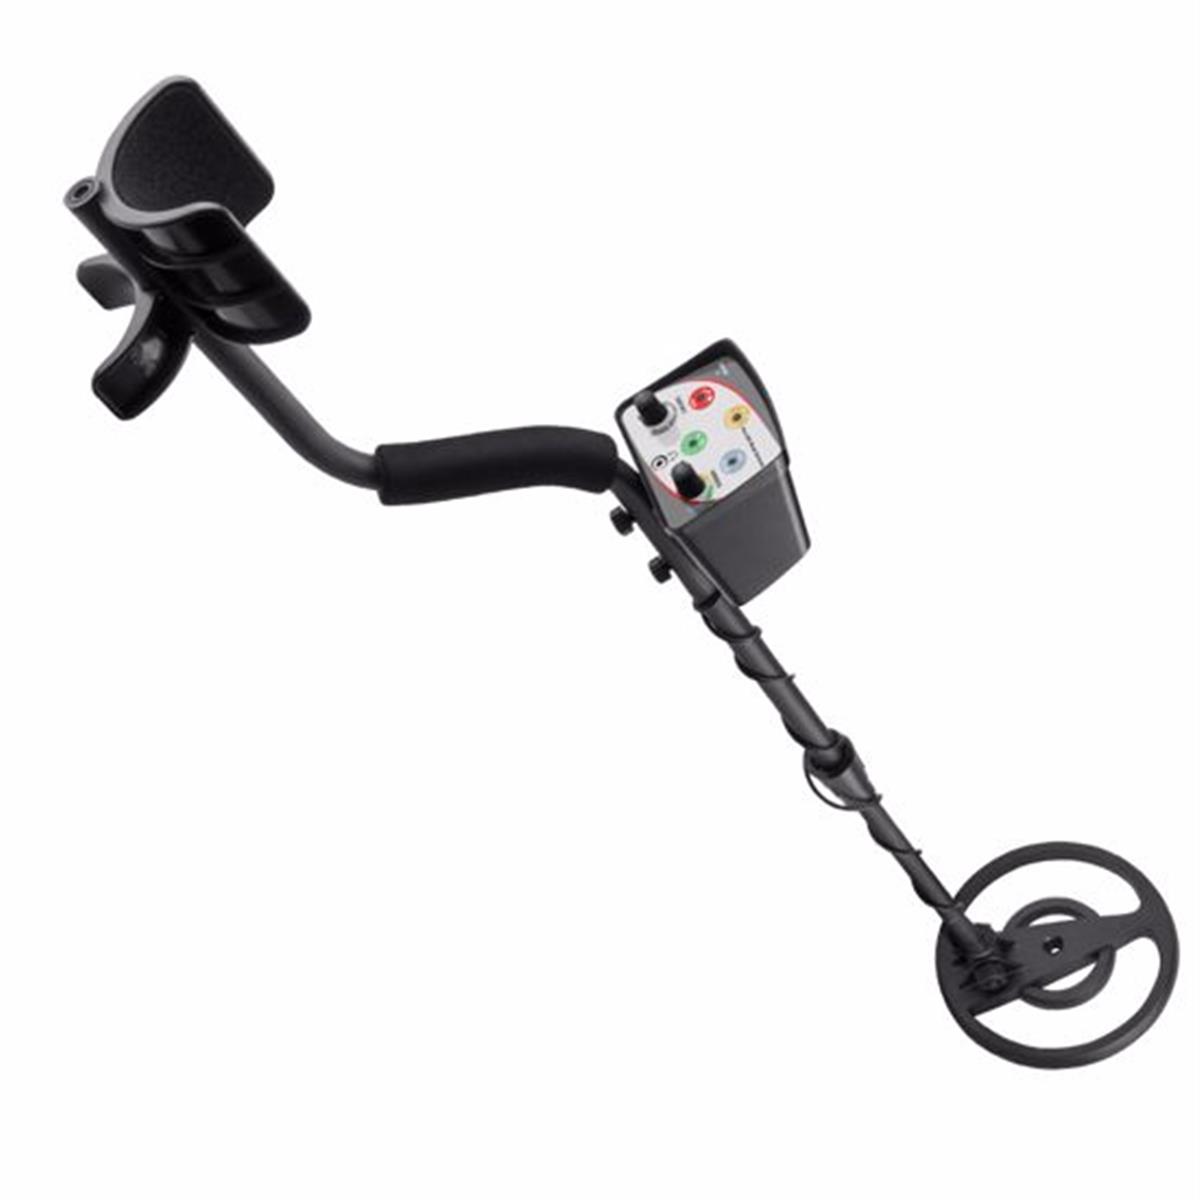 Picture of Barska BE13230 Pro 400 Winbest Edition Metal Detector with 4-Color LED Indicator